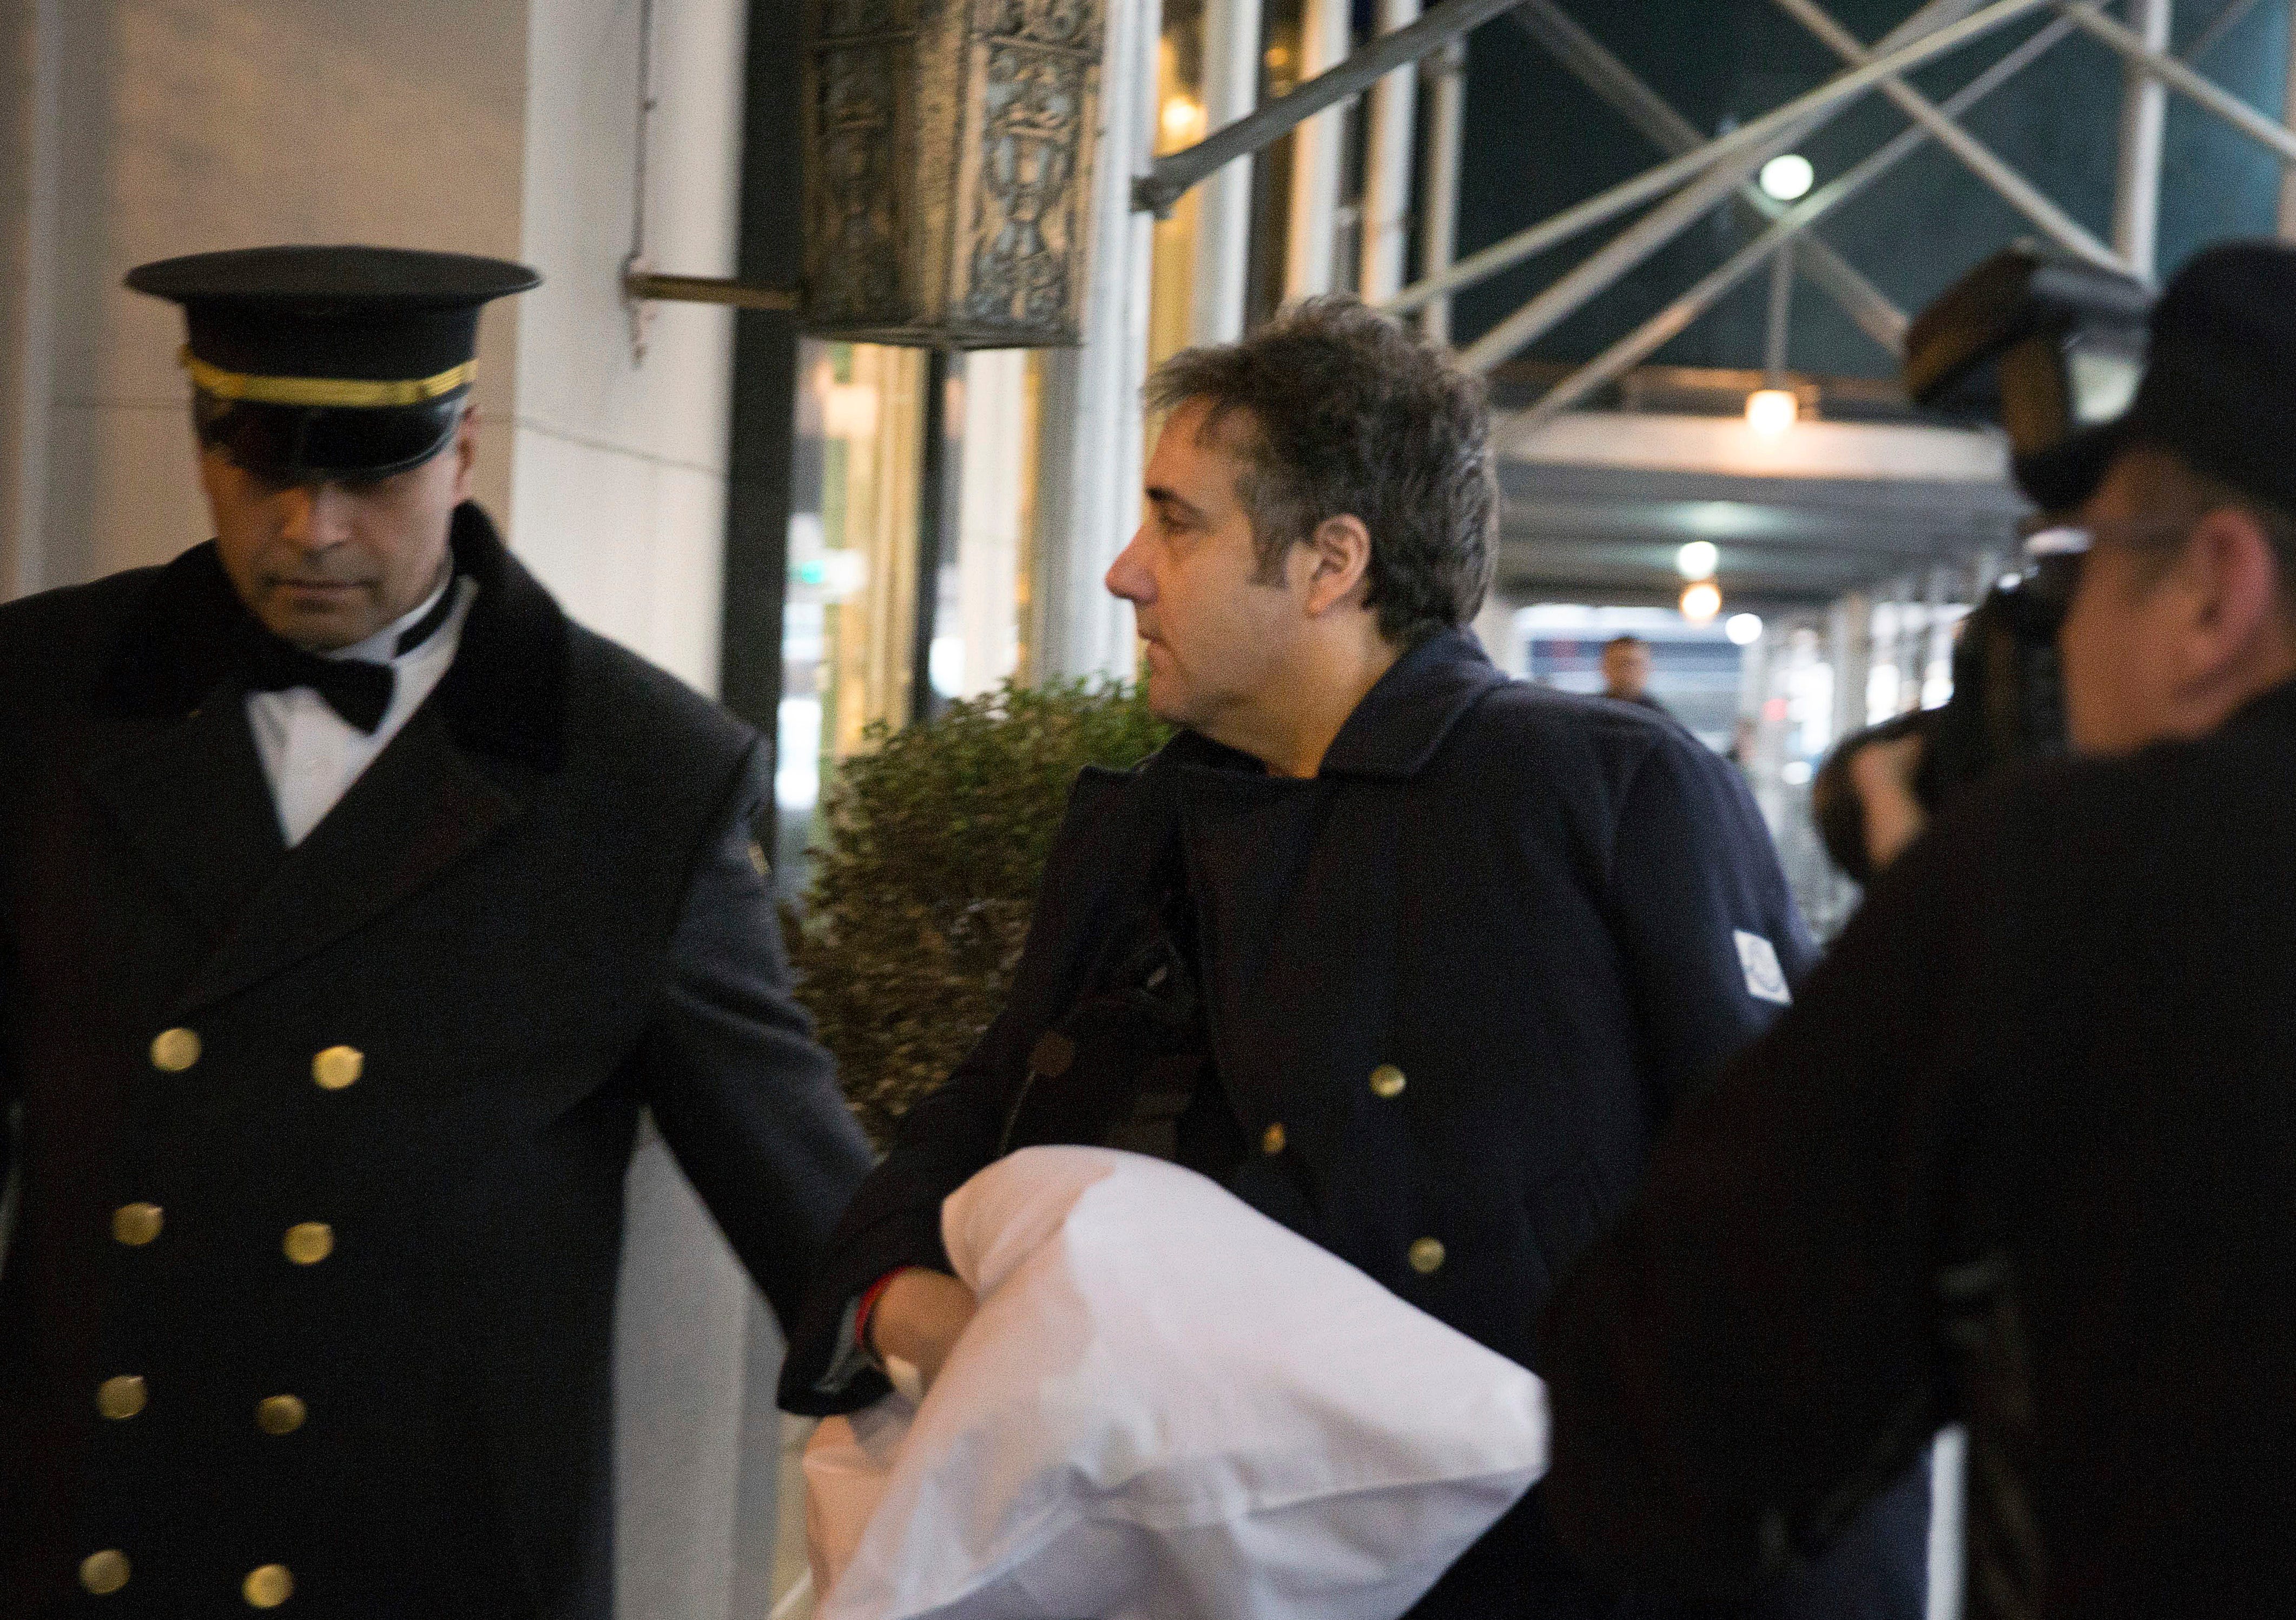 Michael Cohen arrives at his home in New York with his left arm in a sling supported by a pillow Friday, Jan. 18, 2019.